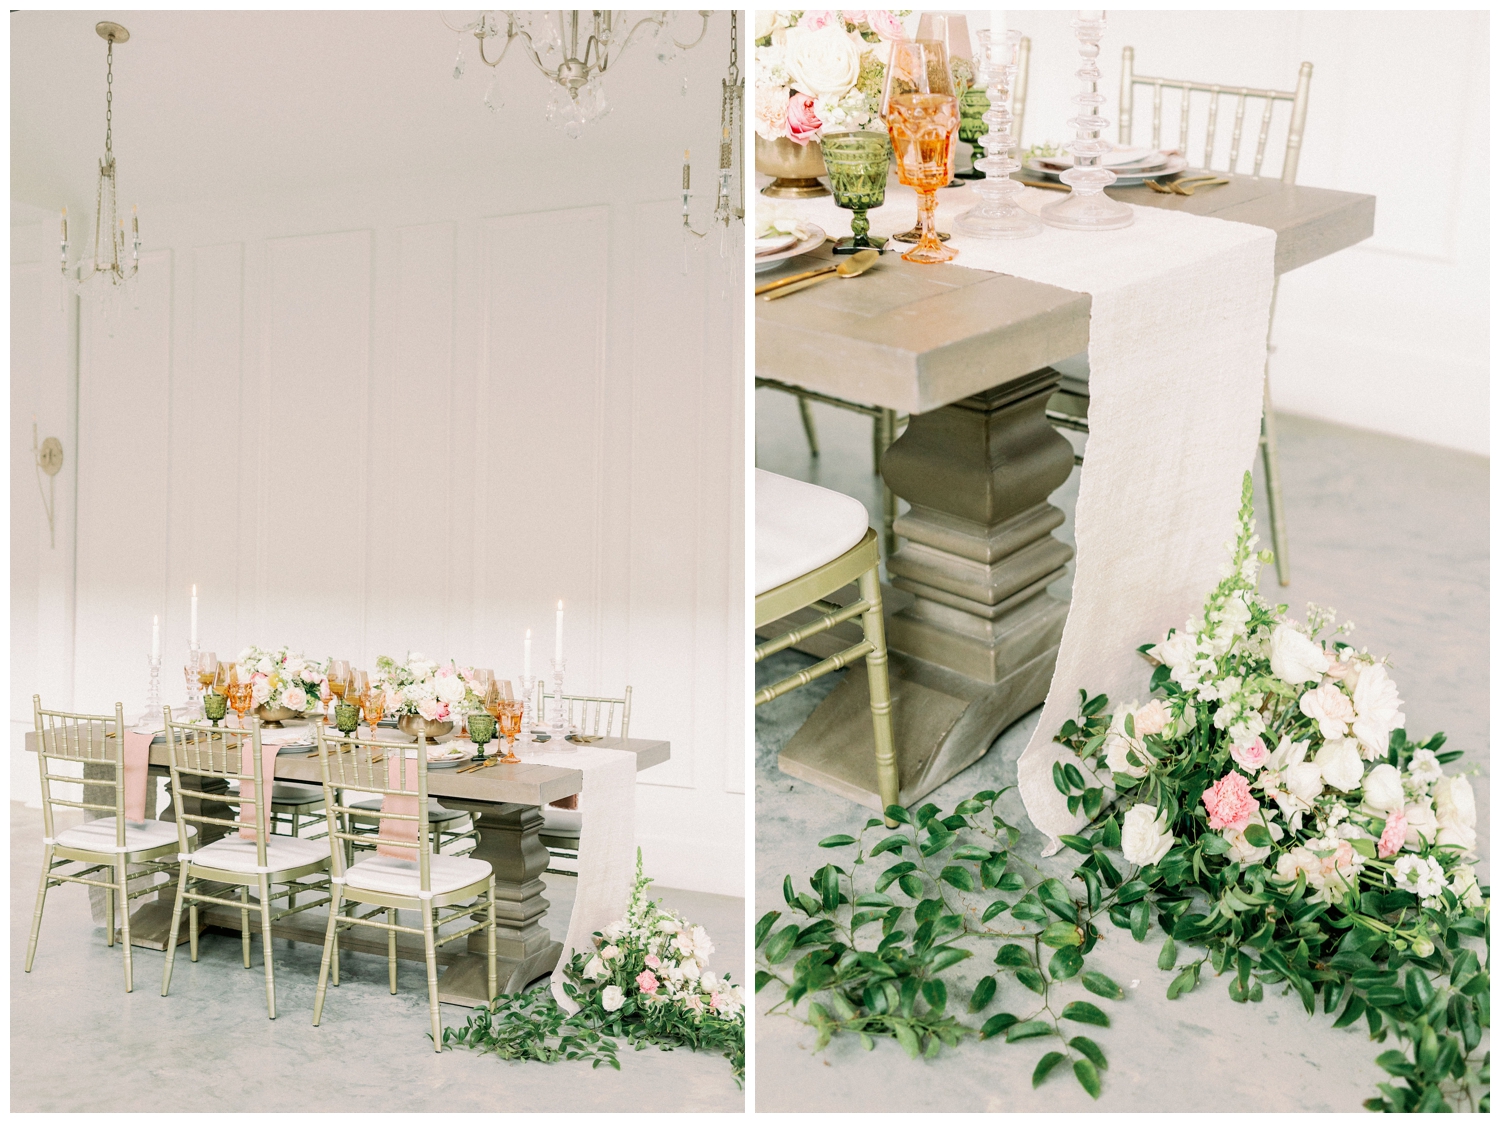 farmhouse table with floral display on the floor